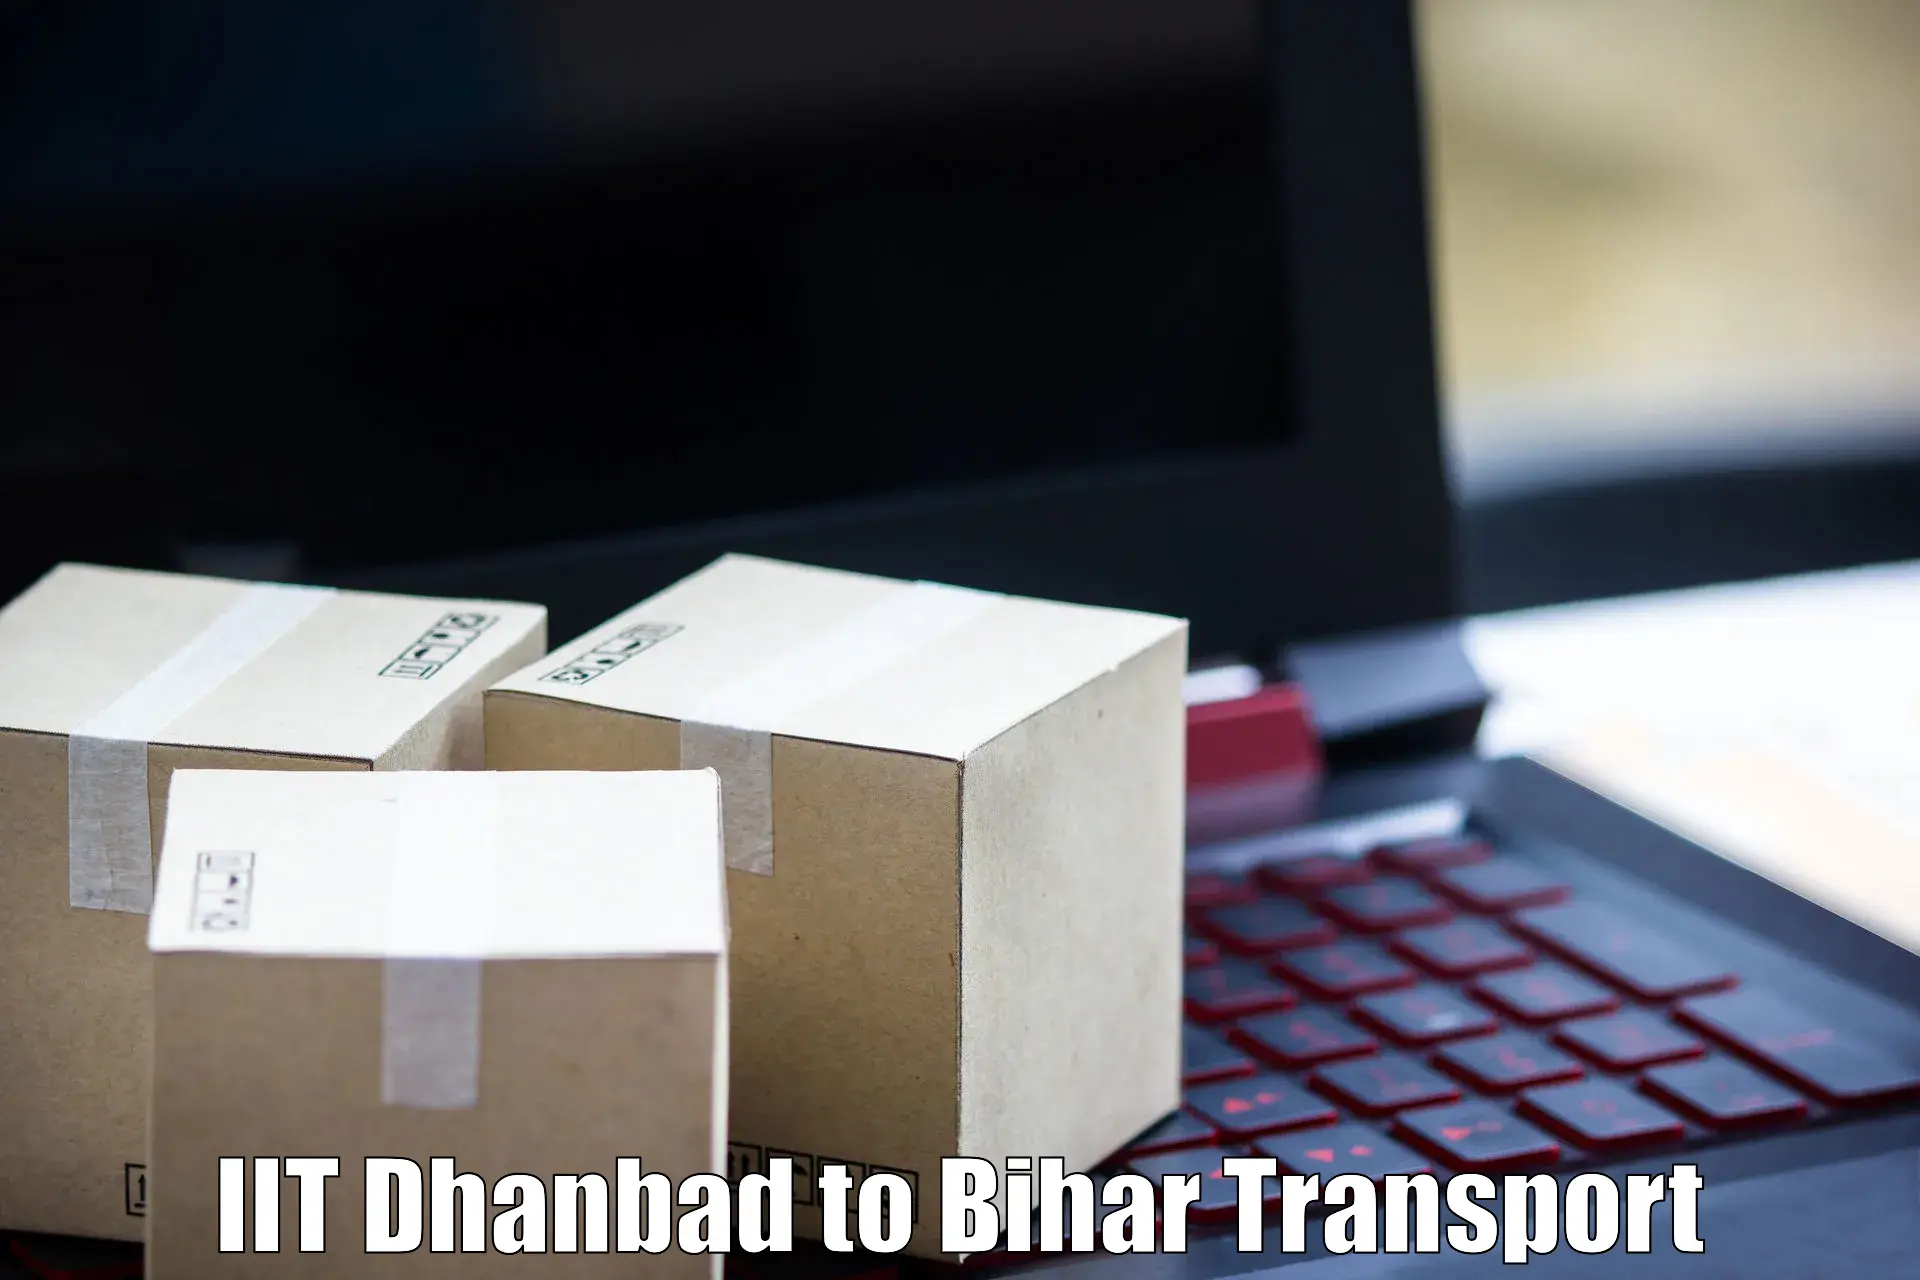 Land transport services in IIT Dhanbad to Barachati